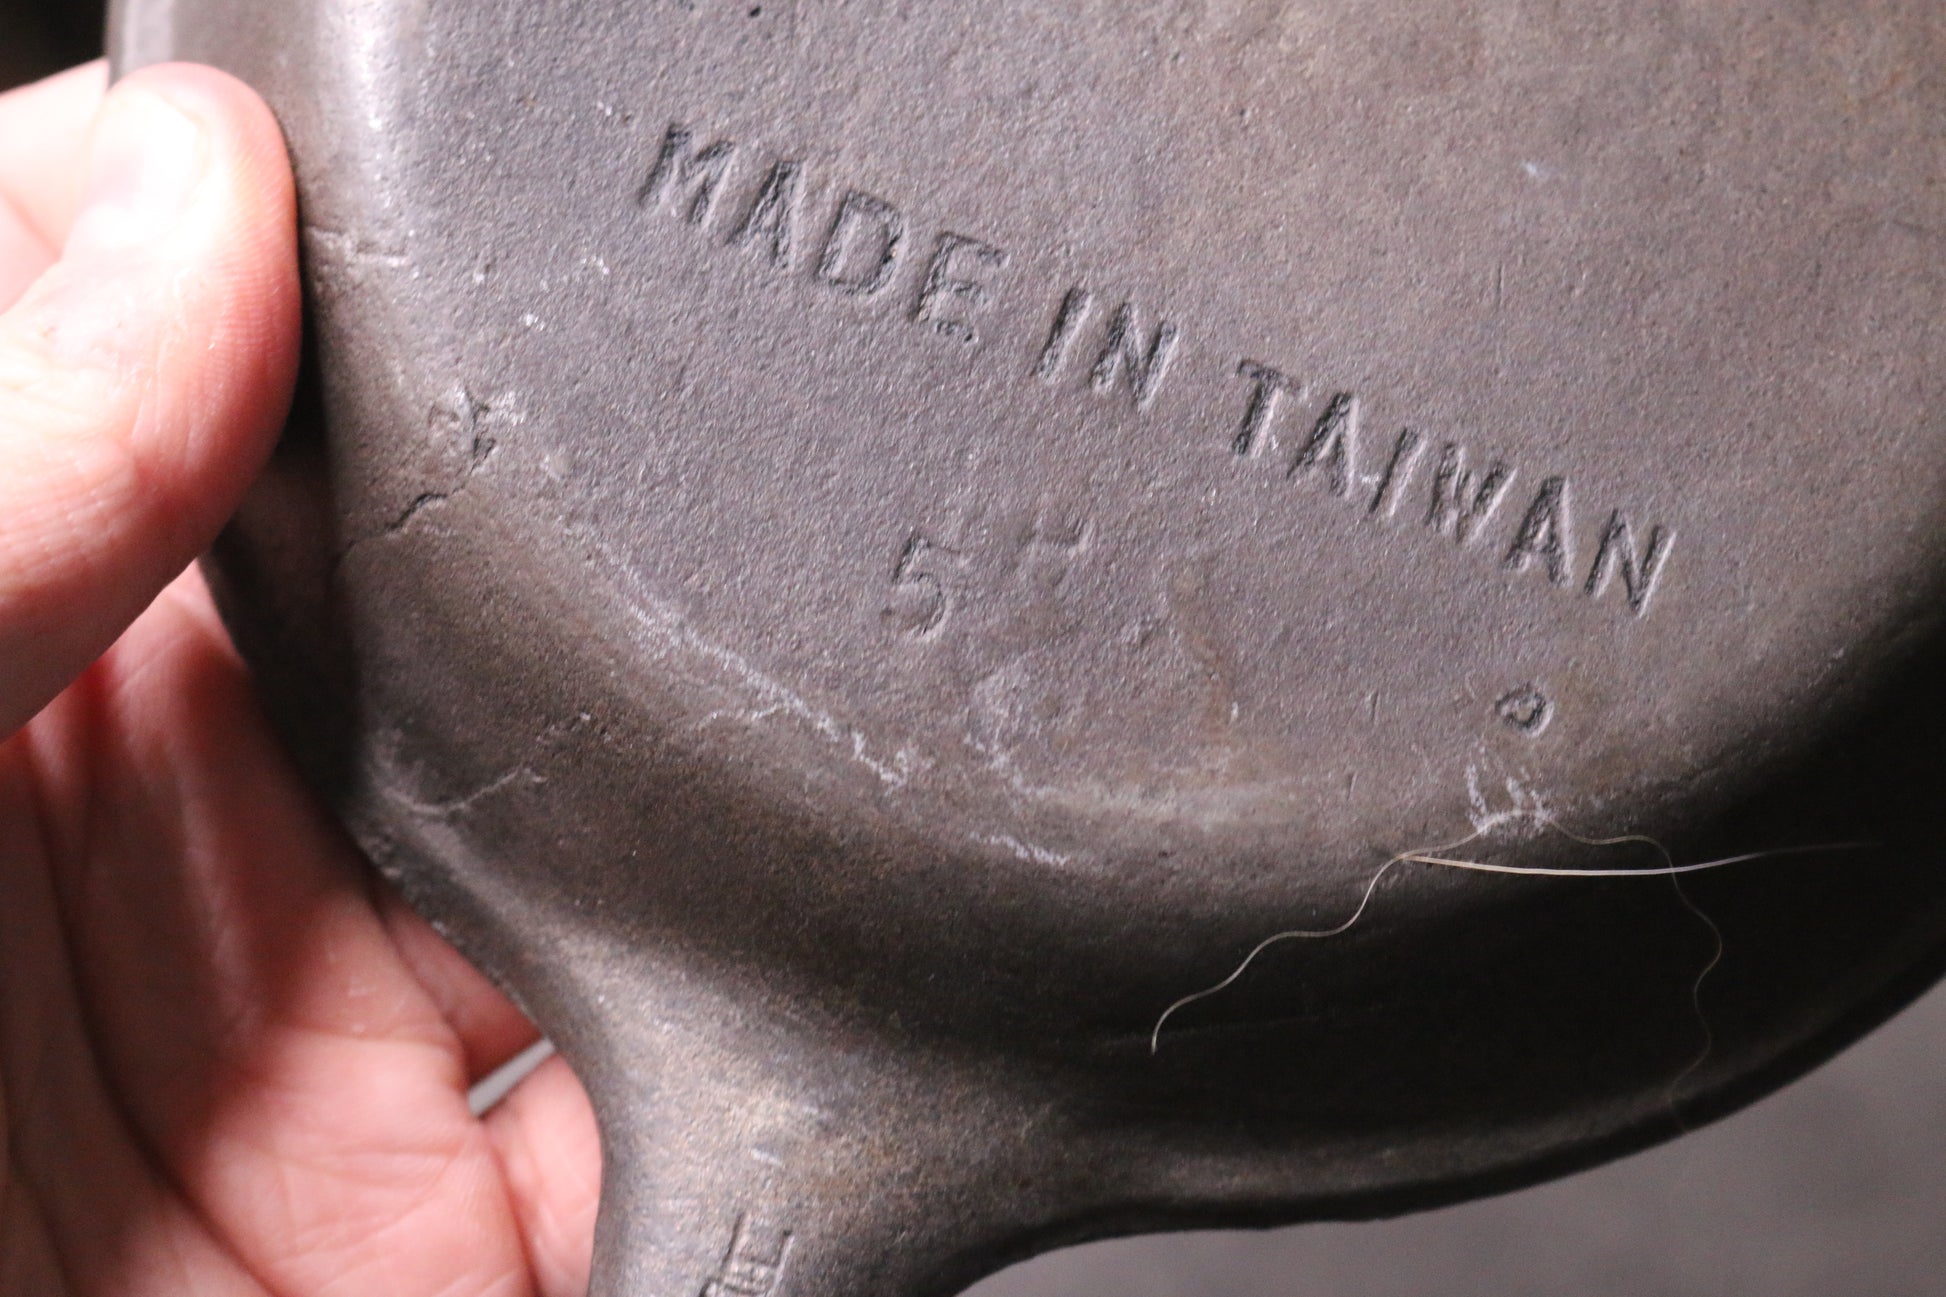 Vintage No5 8 Cast Iron Skillet / Frying Pan Made In Taiwan #5 –  Omniphustoys